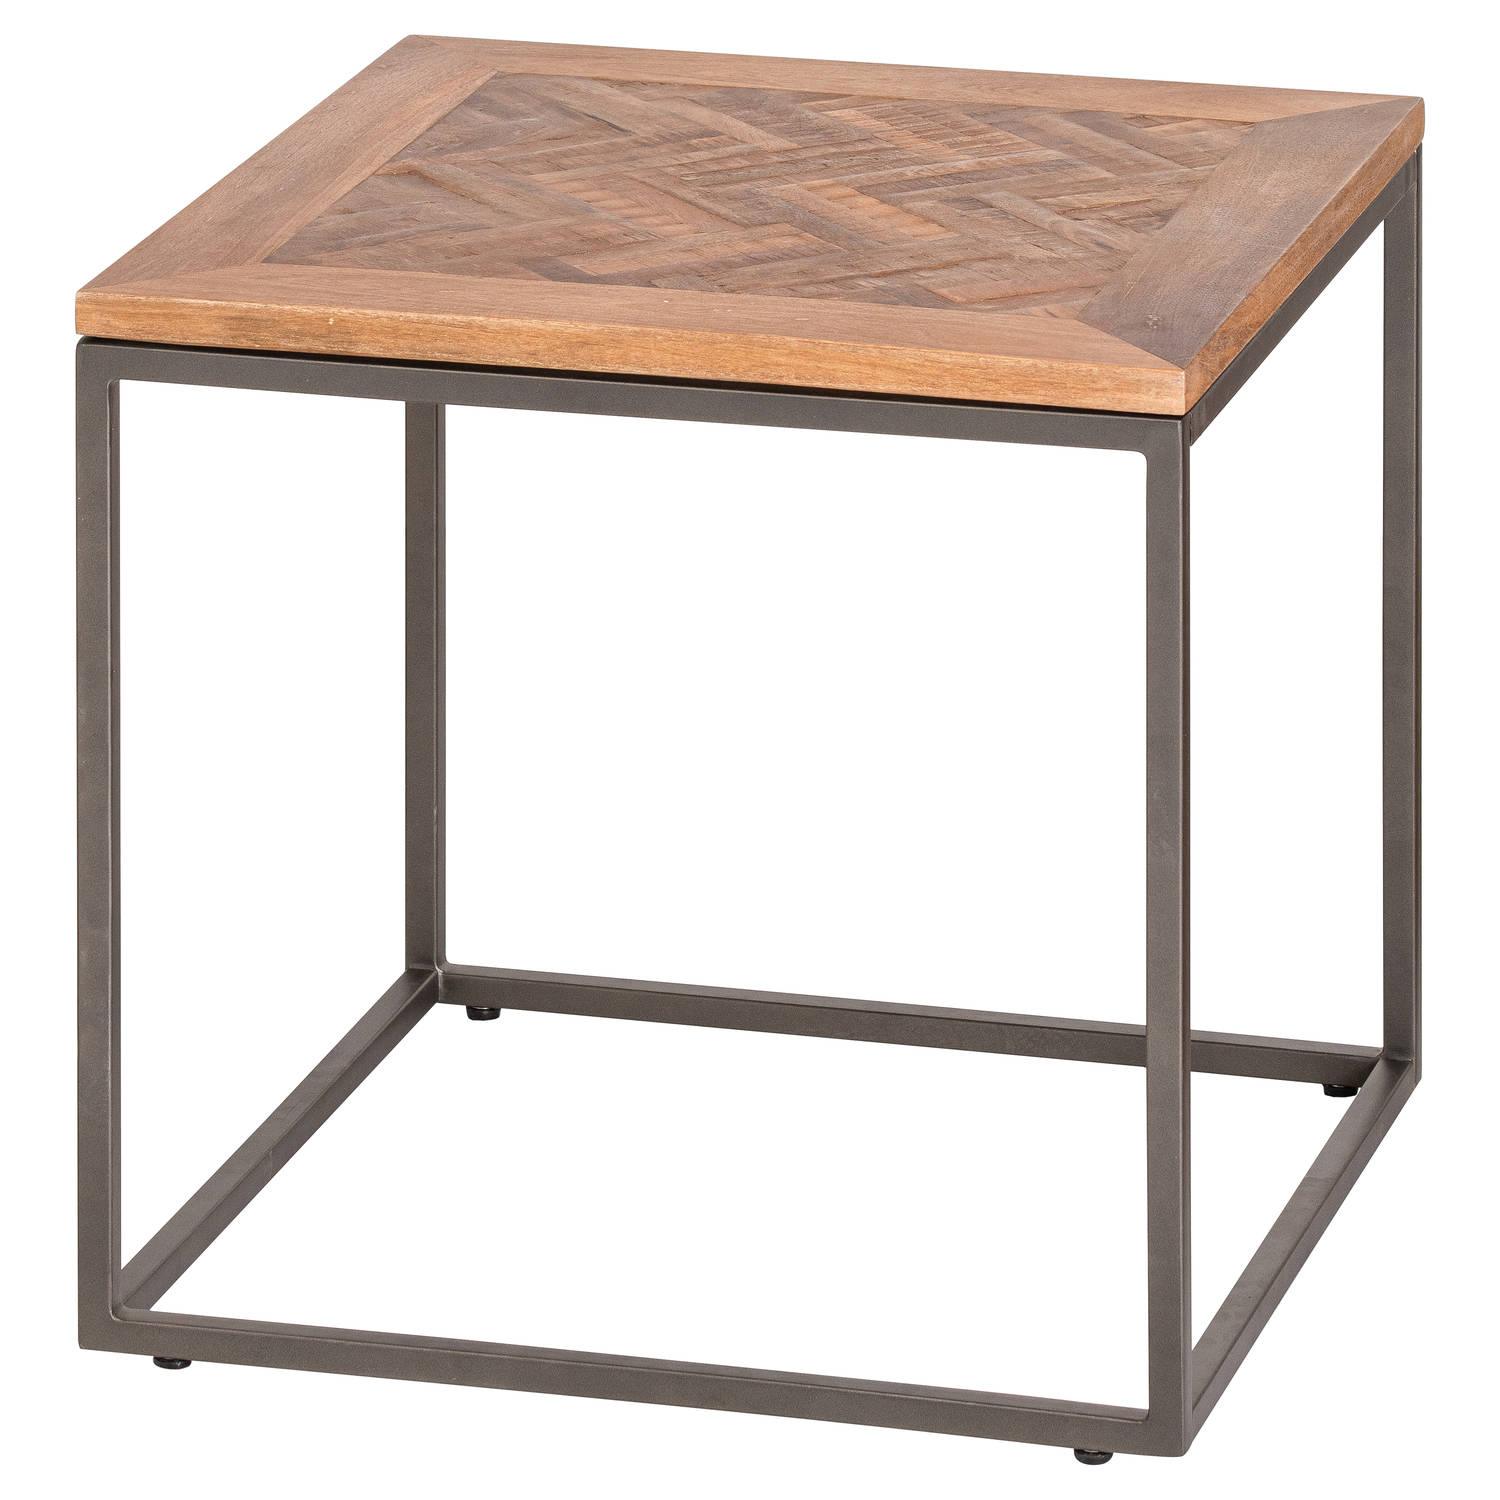 Hoxton Collection Side Table With Parquet Top - Vookoo Lifestyle